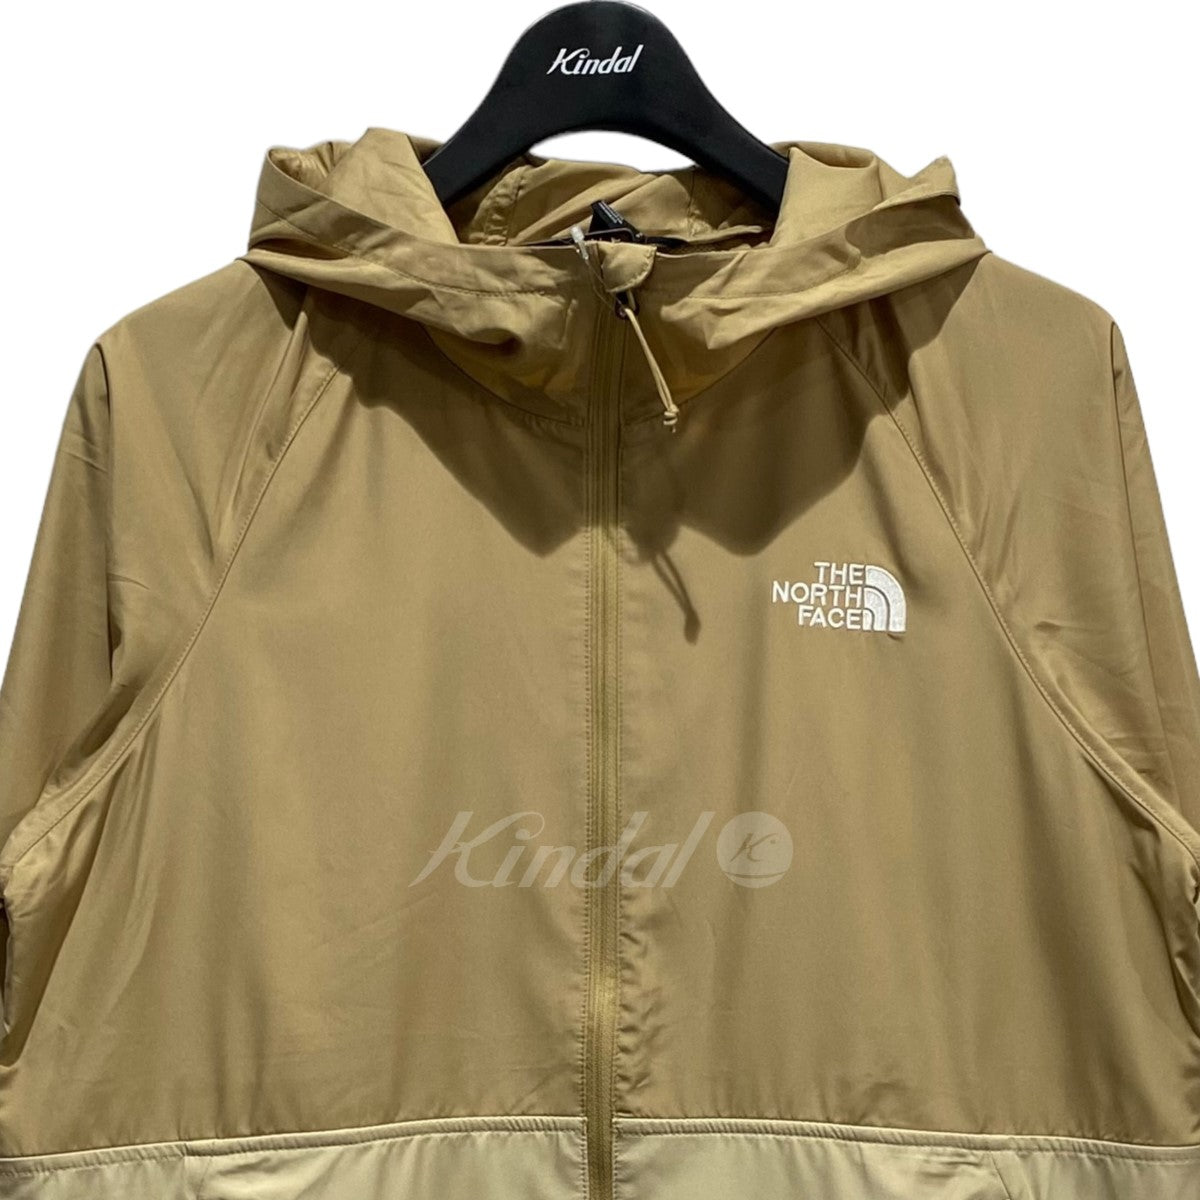 THE NORTH FACE(ザノースフェイス) Tech Wind Hoodie ナイロン 